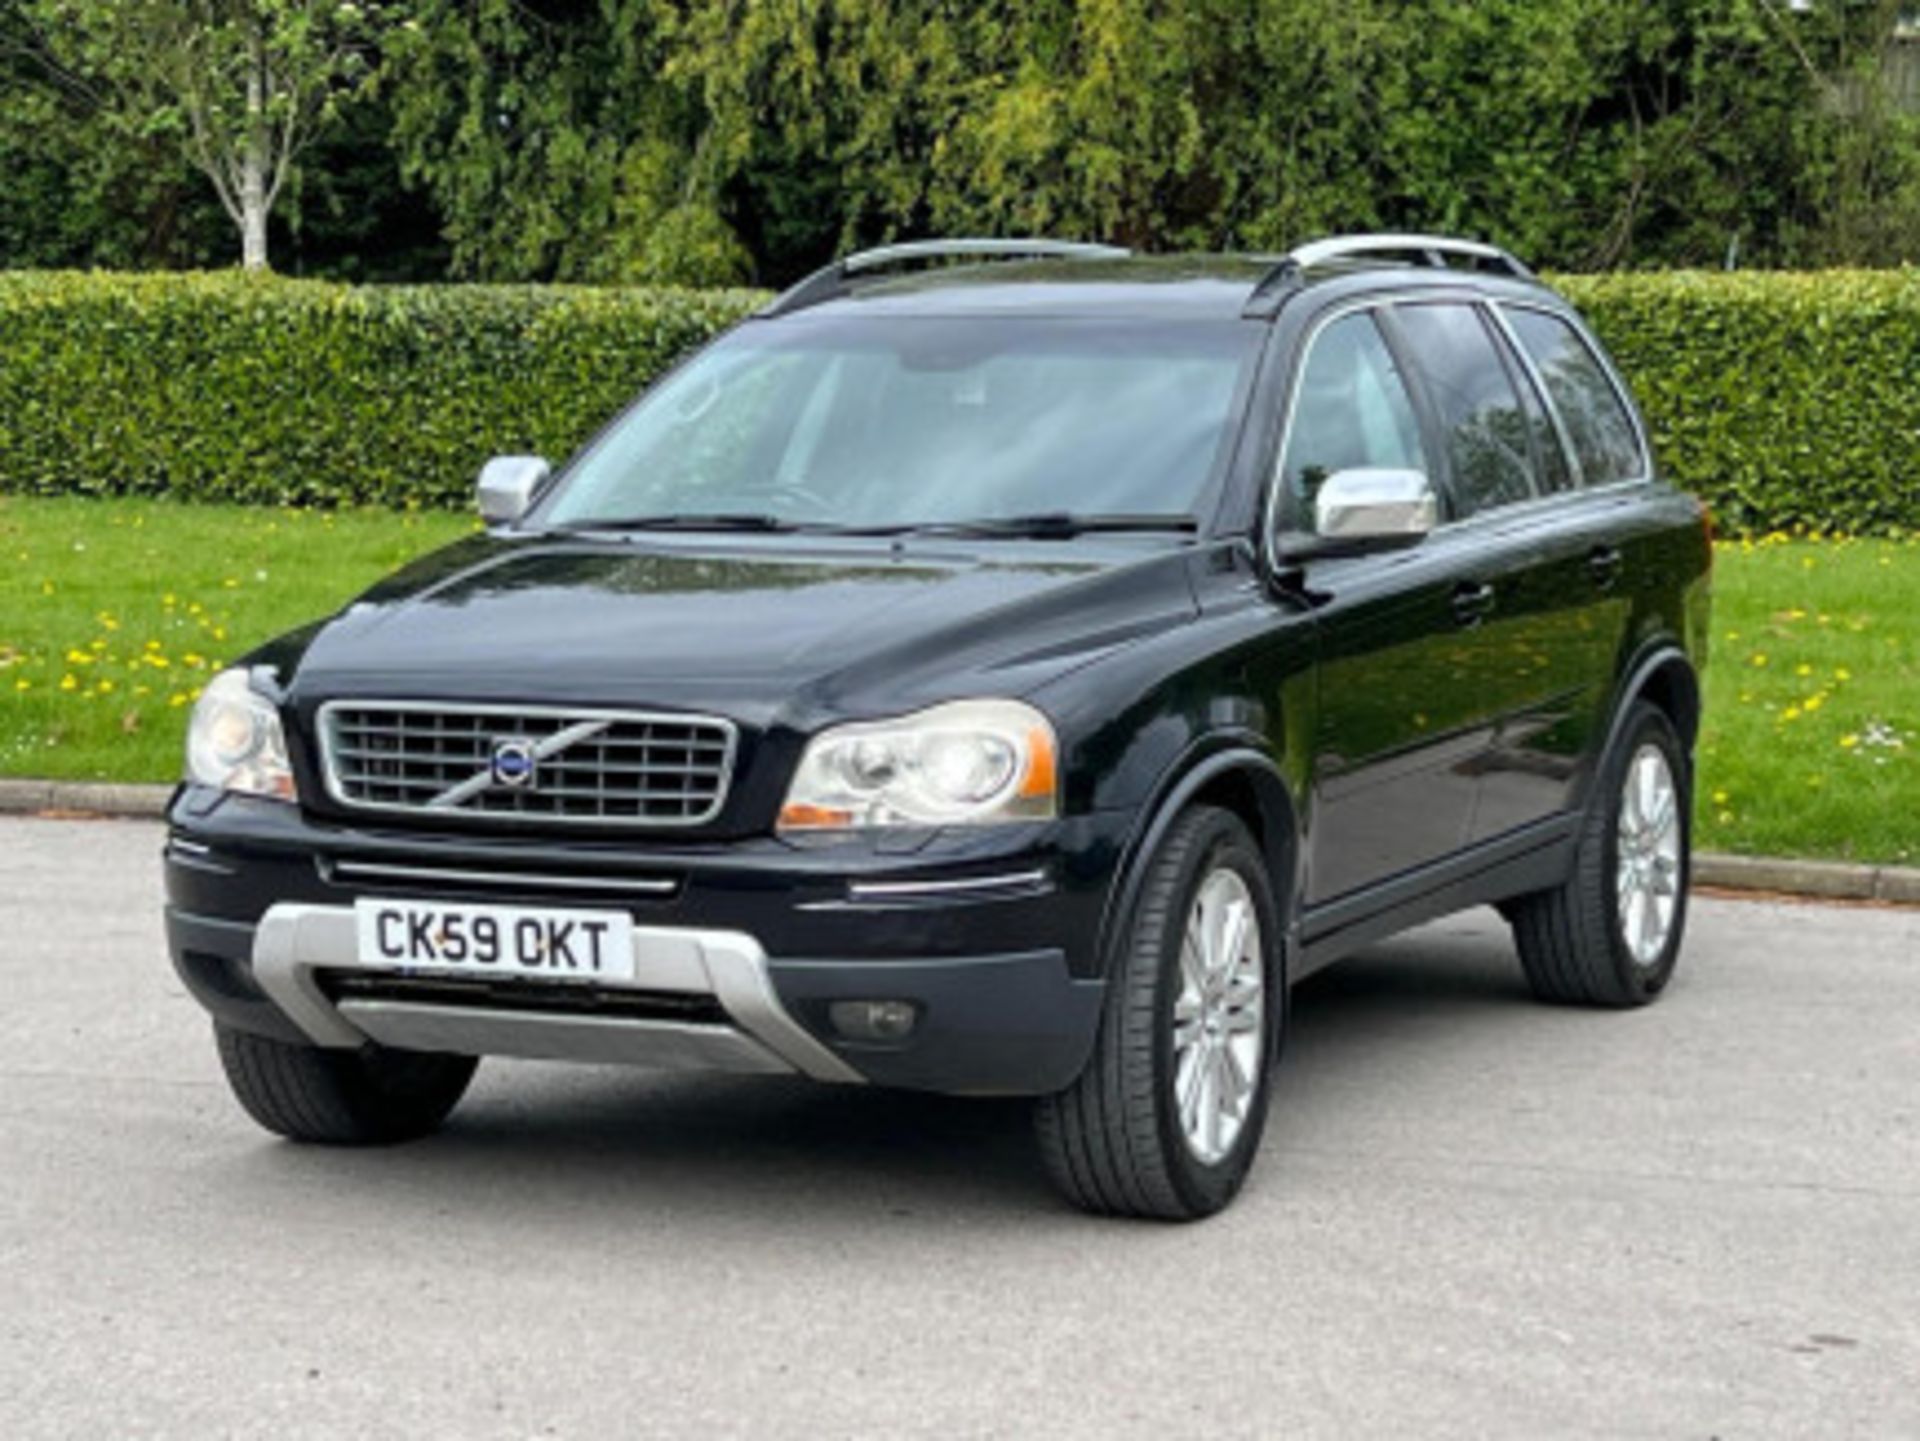 VOLVO XC90 2.4 D5 EXECUTIVE GEARTRONIC AWD, 5DR >>--NO VAT ON HAMMER--<< - Image 74 of 136